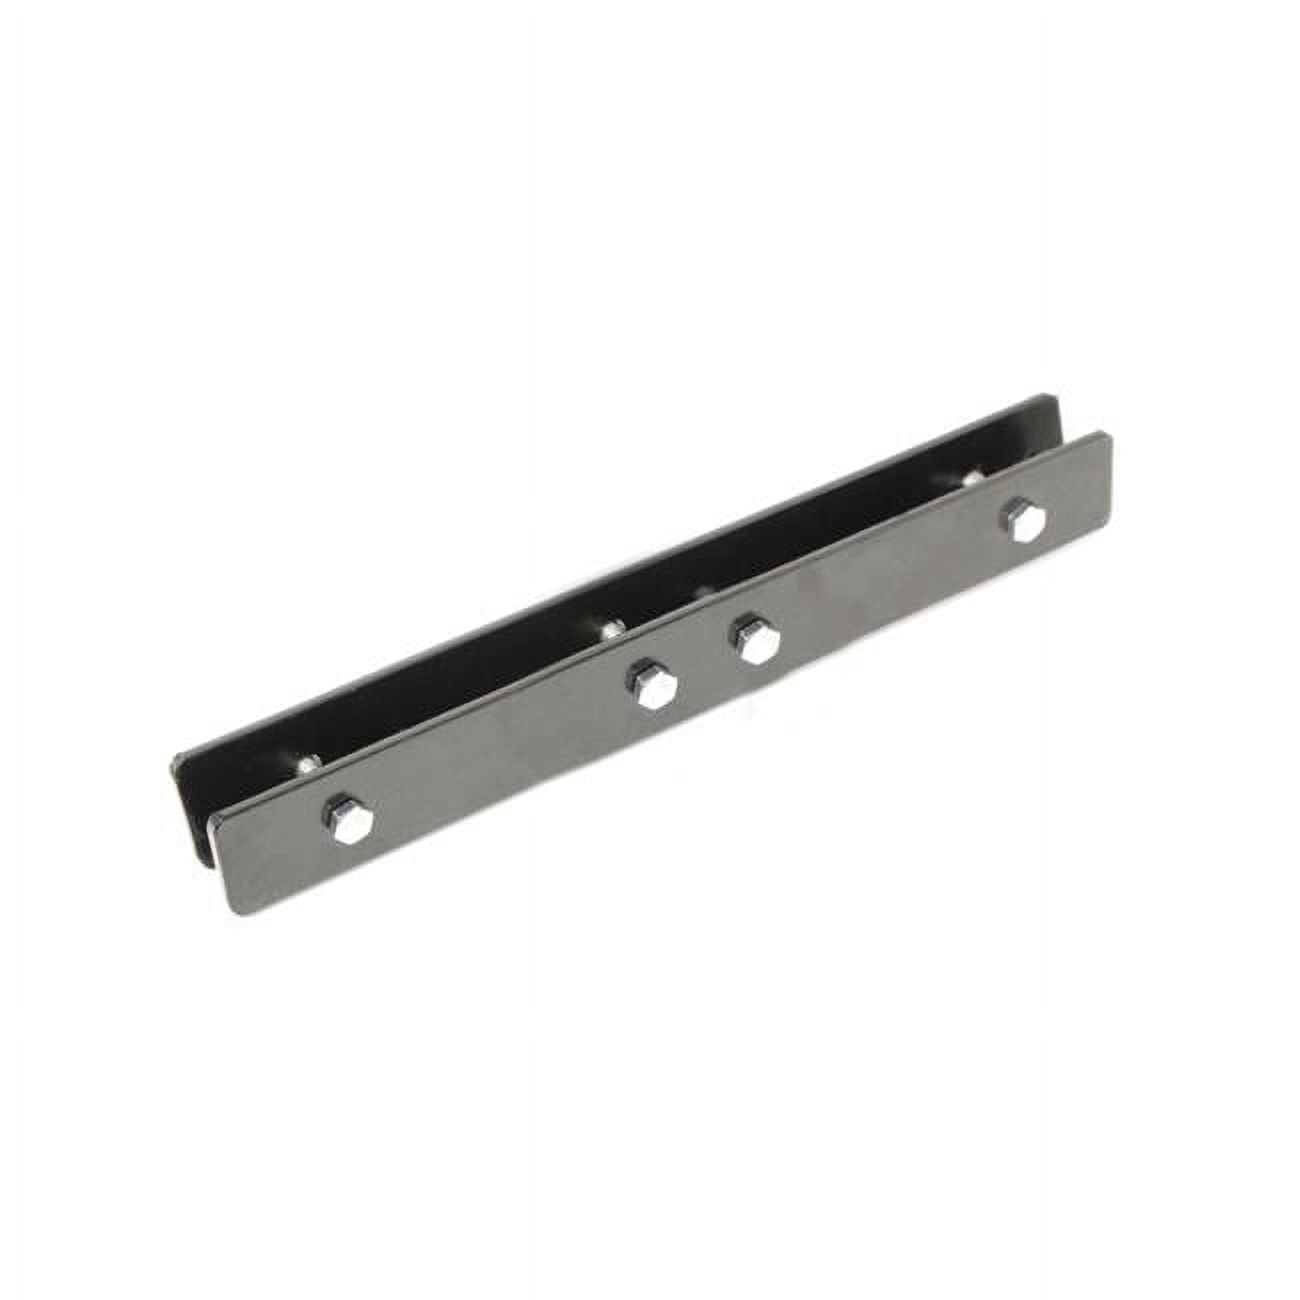 Picture of Aleko LM195-UNB Universal Gate Attach Bracket for Gate Opener